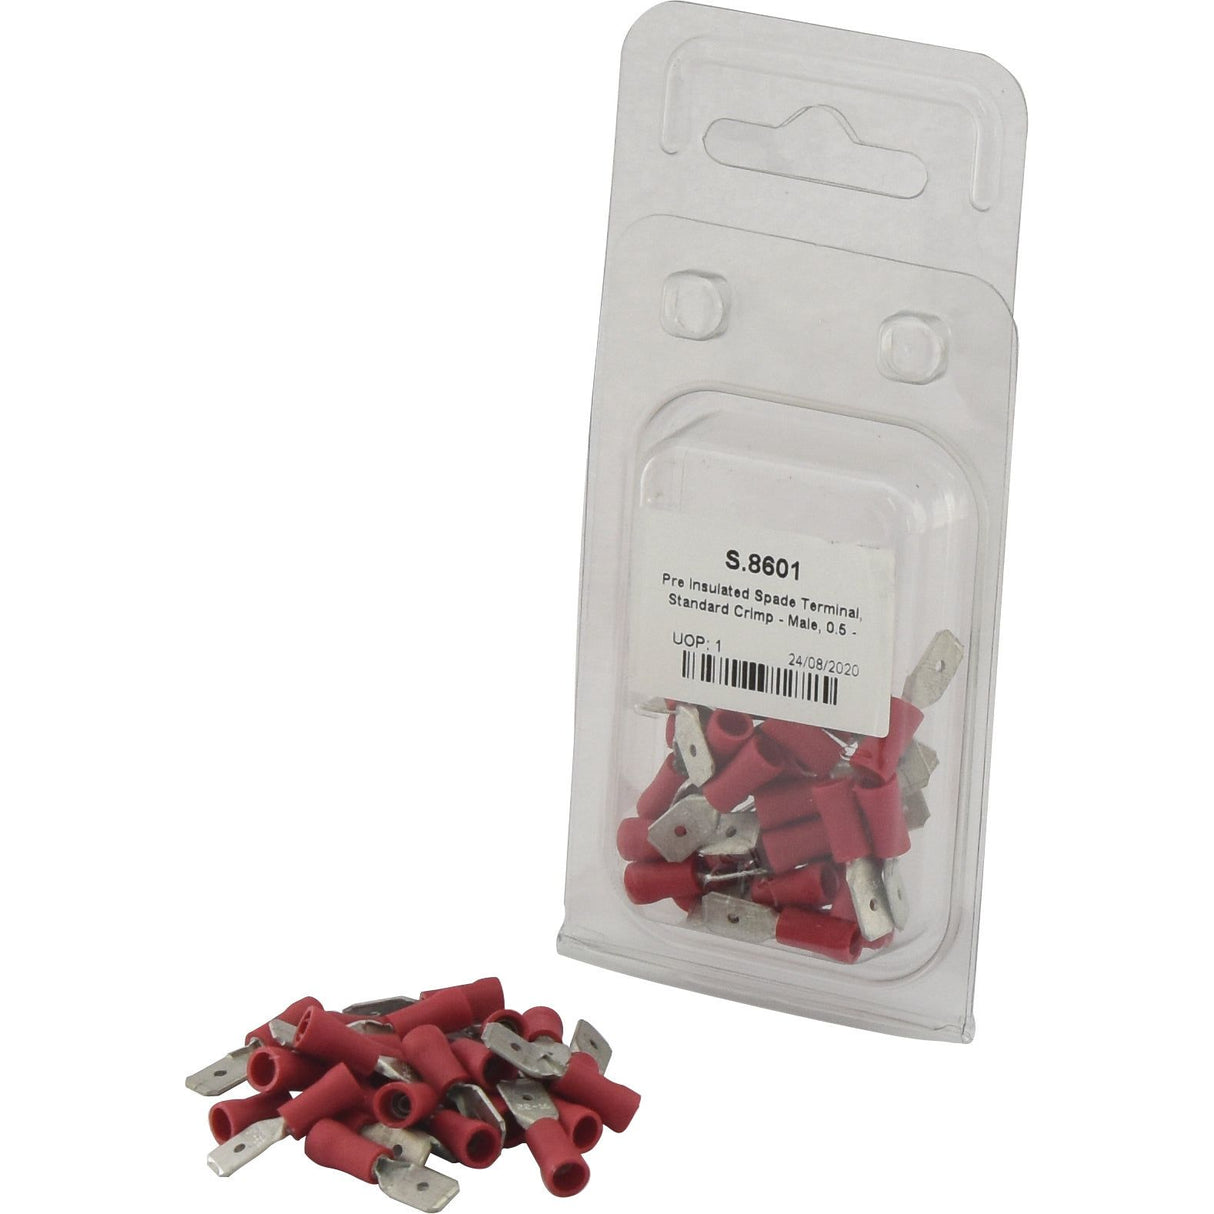 Pre Insulated Spade Terminal, Standard Grip - Male, 6.3mm, Red (0.5 - 1.5mm) (Agripak 25 pcs.)
 - S.8601 - Farming Parts